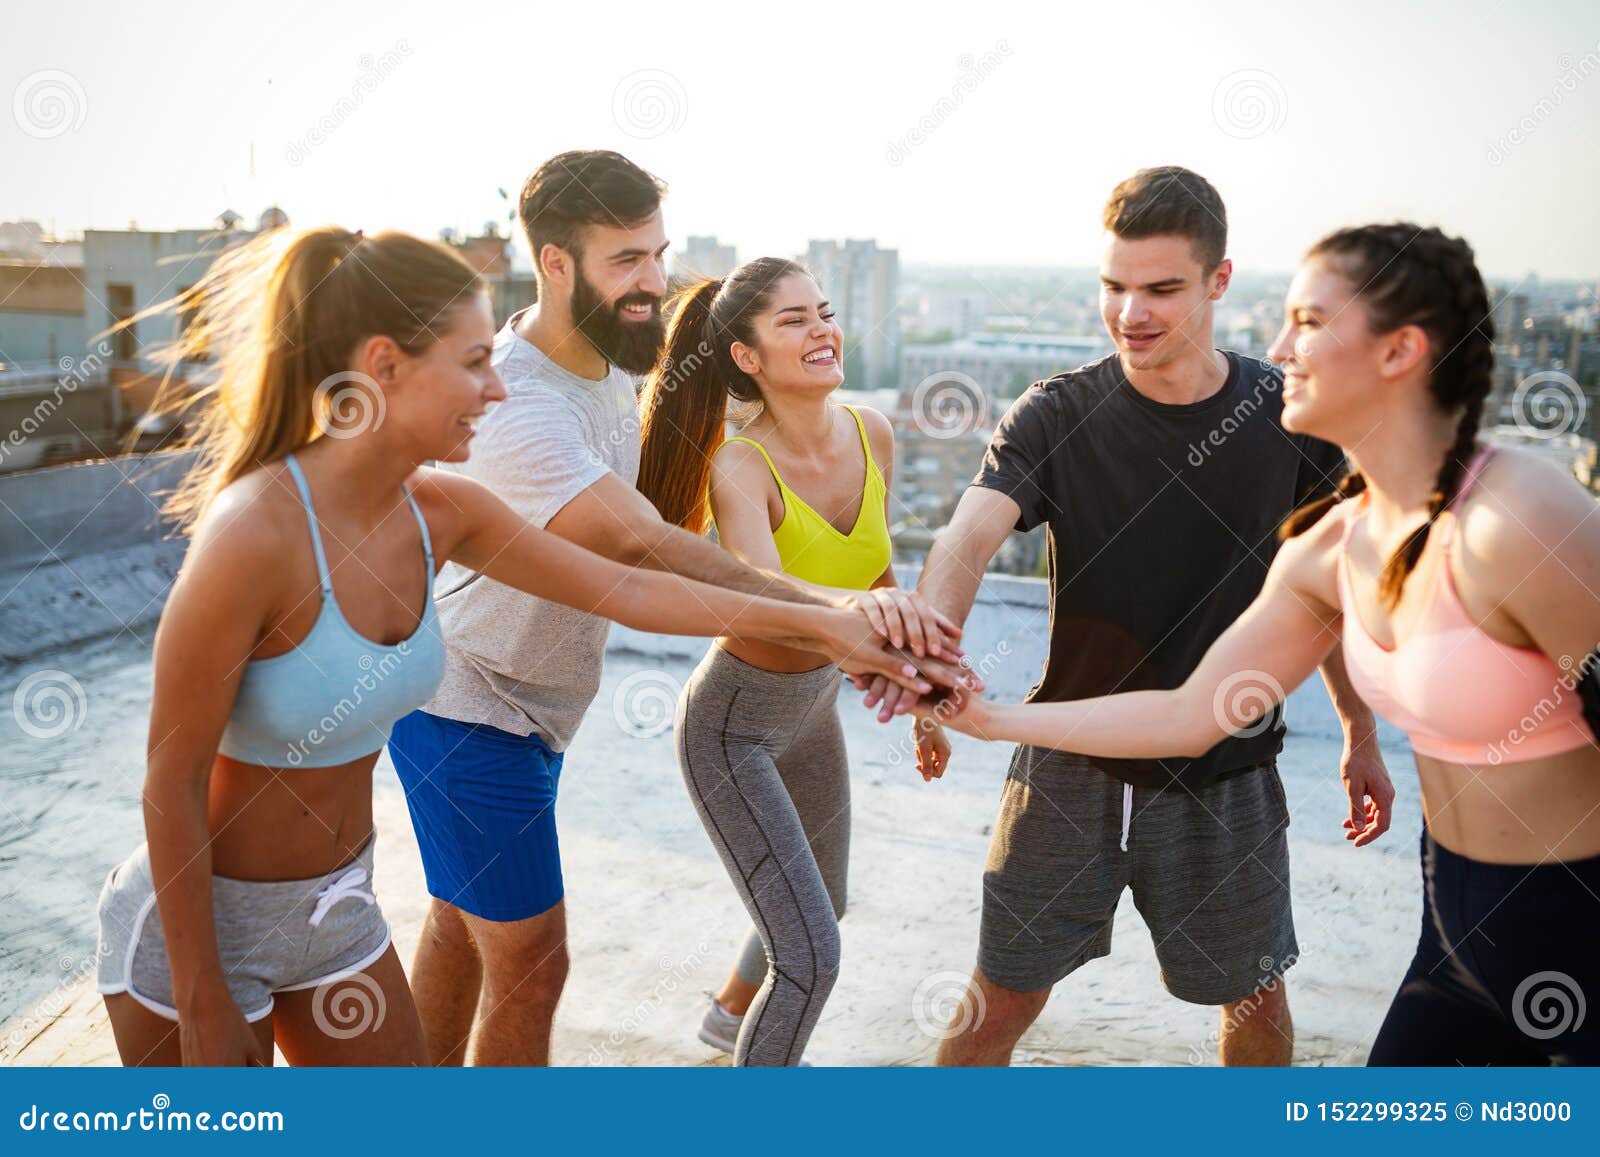 Group of Happy Fit Friends Exercising Outdoor in City Stock Image ...